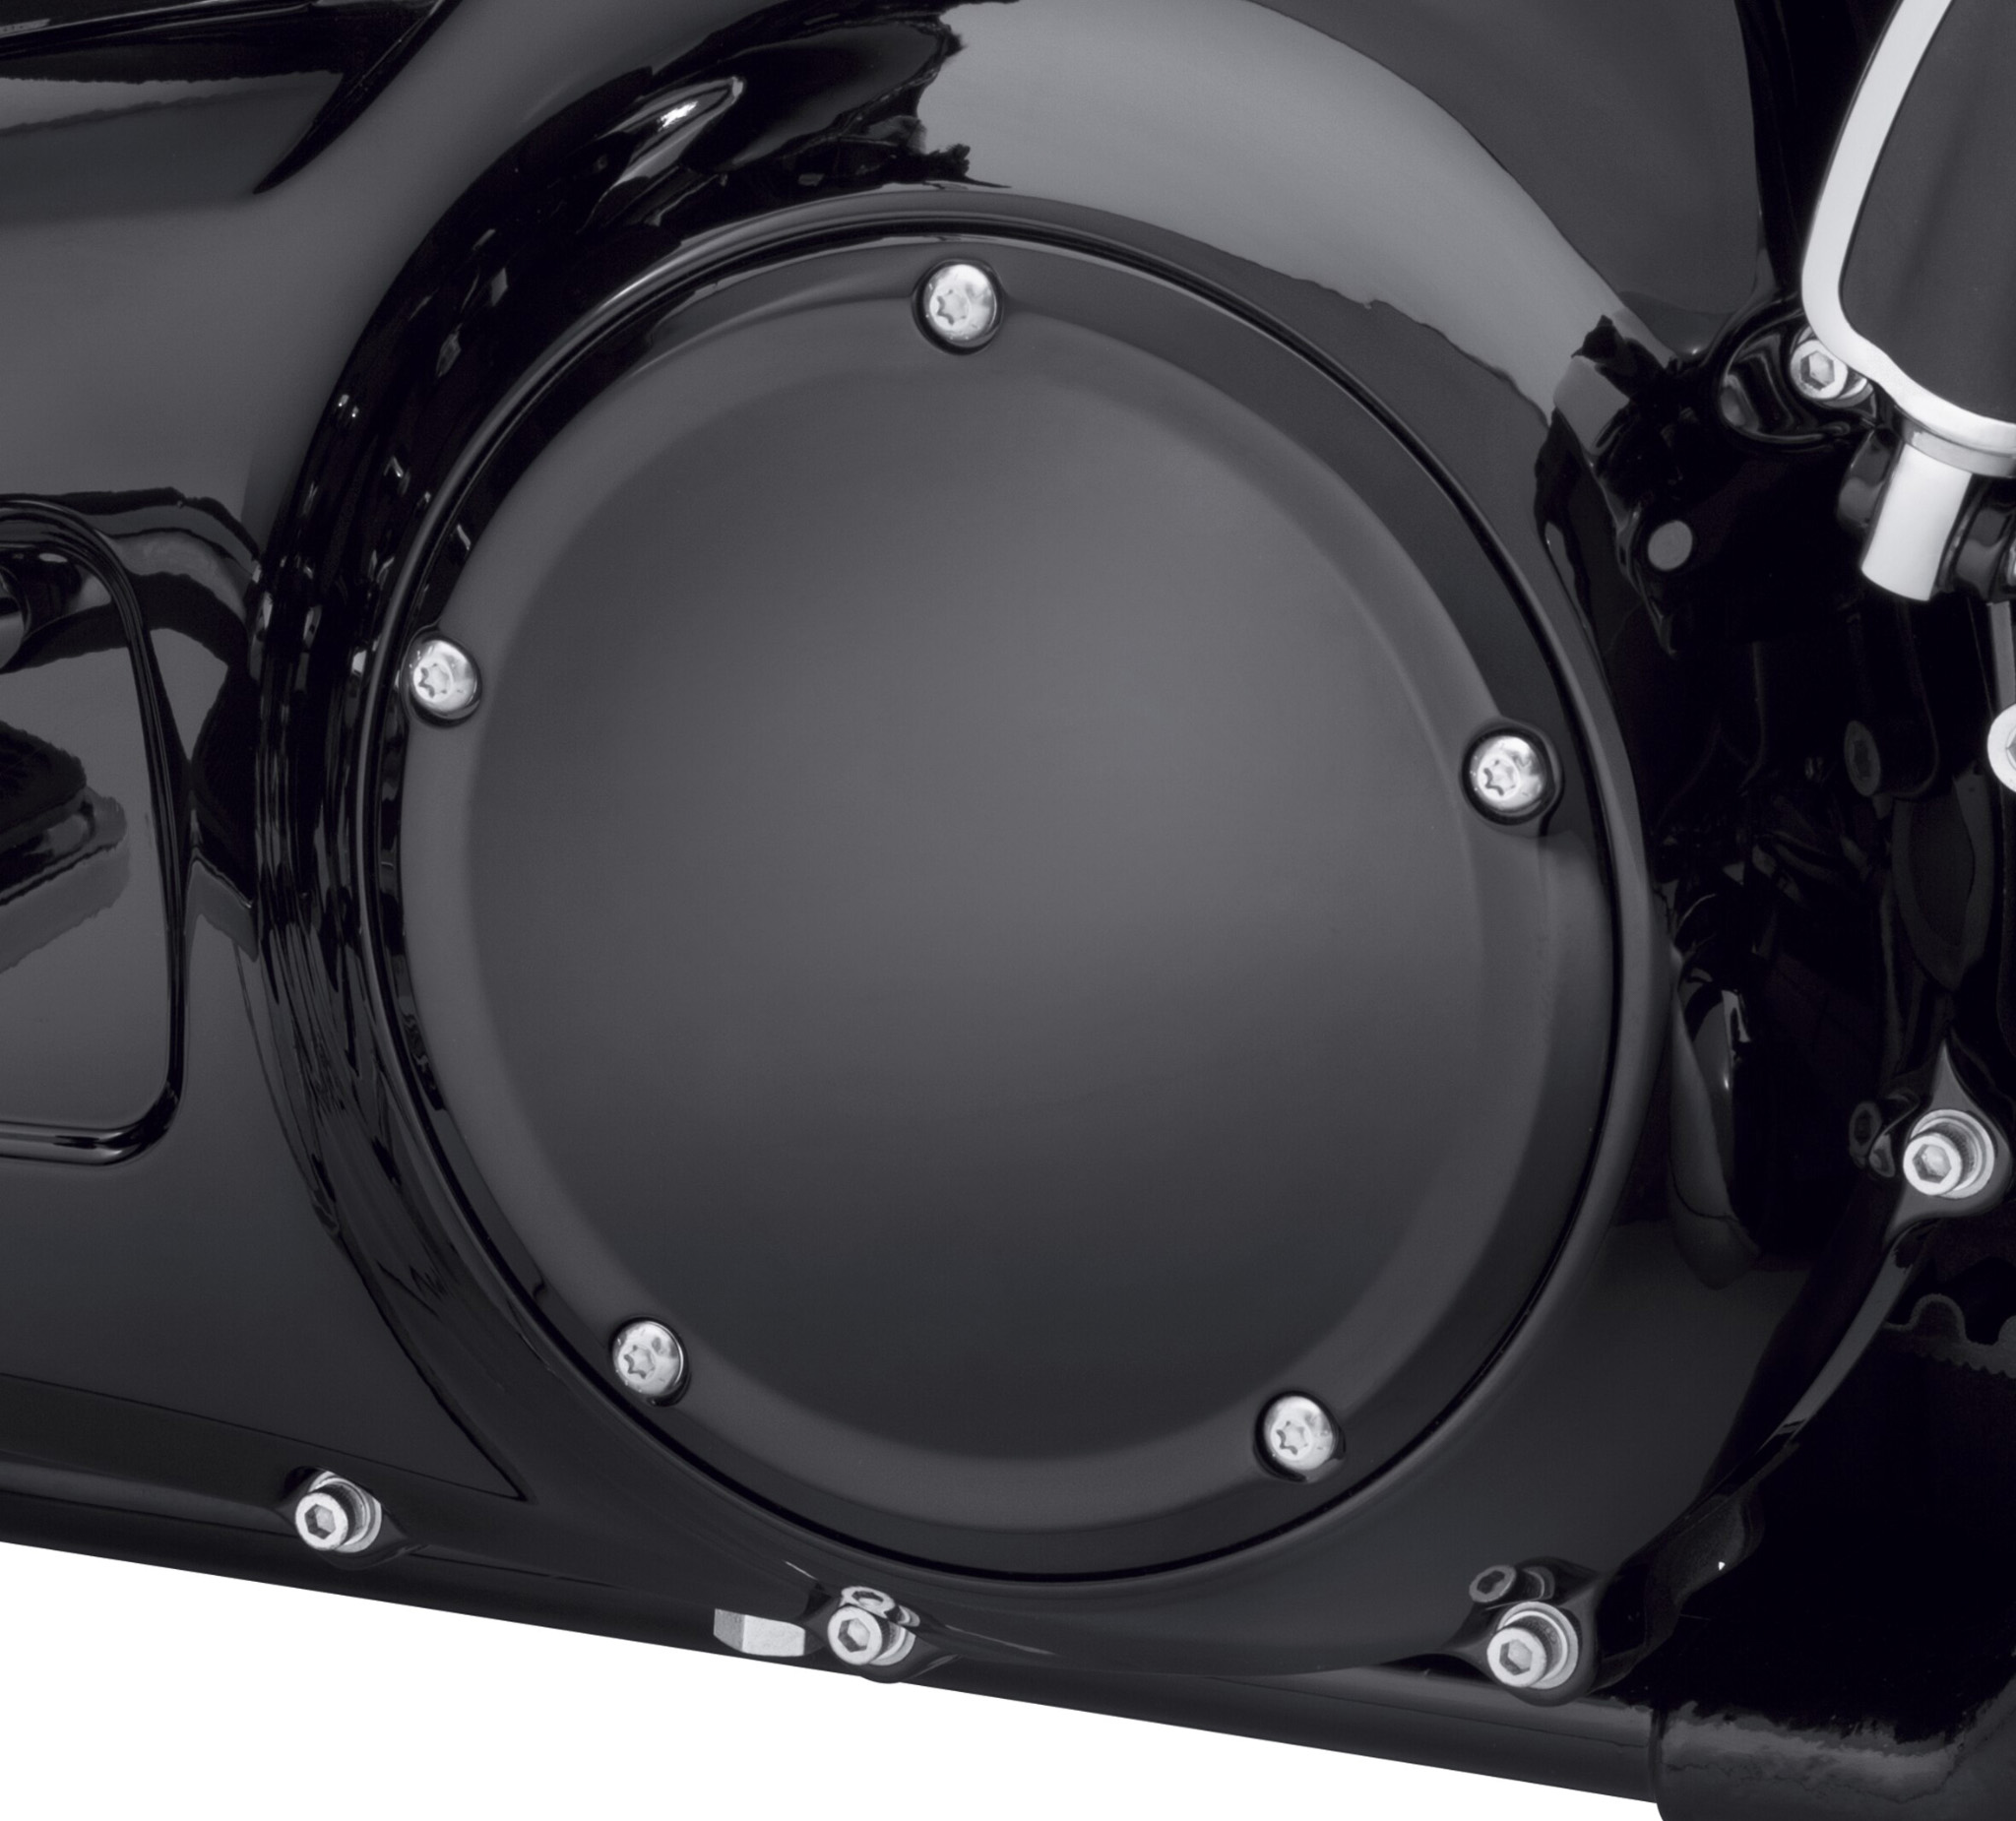 Drag Specialties Gloss Black Derby Cover for 2004-2014 Harley Sportster